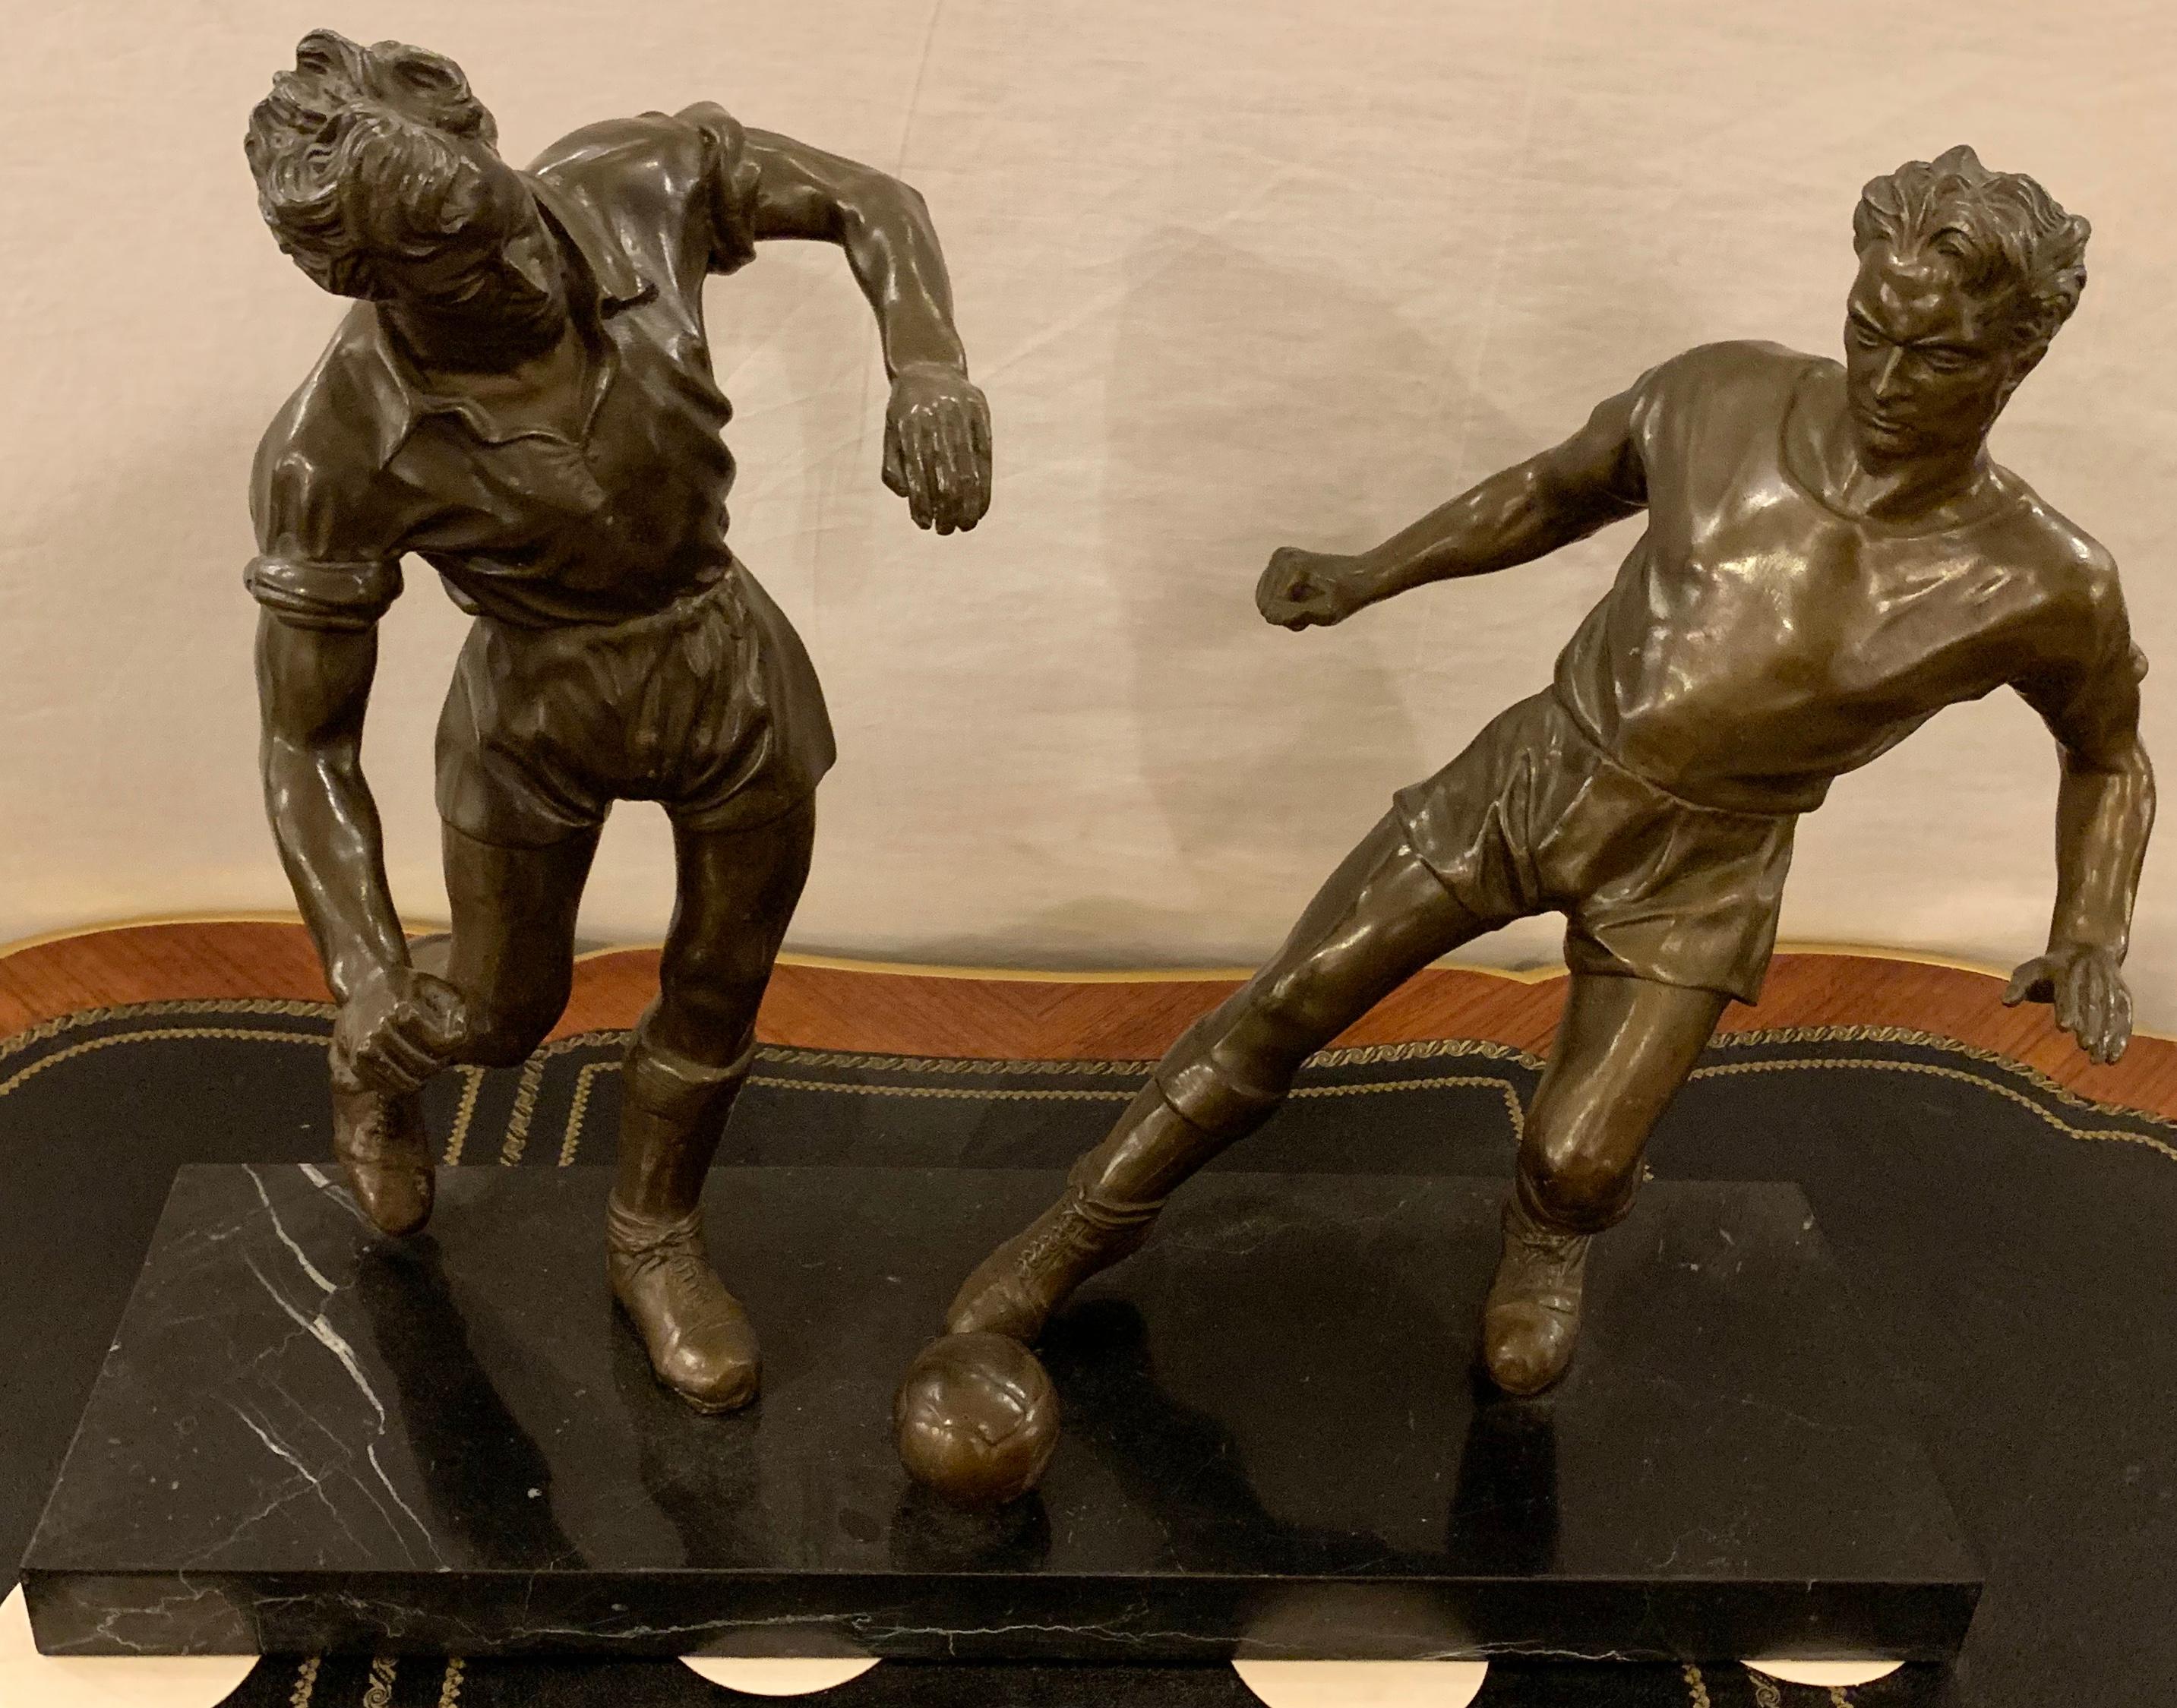 Pair of bronze football or soccer players on a black and white veined marble slab.

Greg
1SXX/11XA.